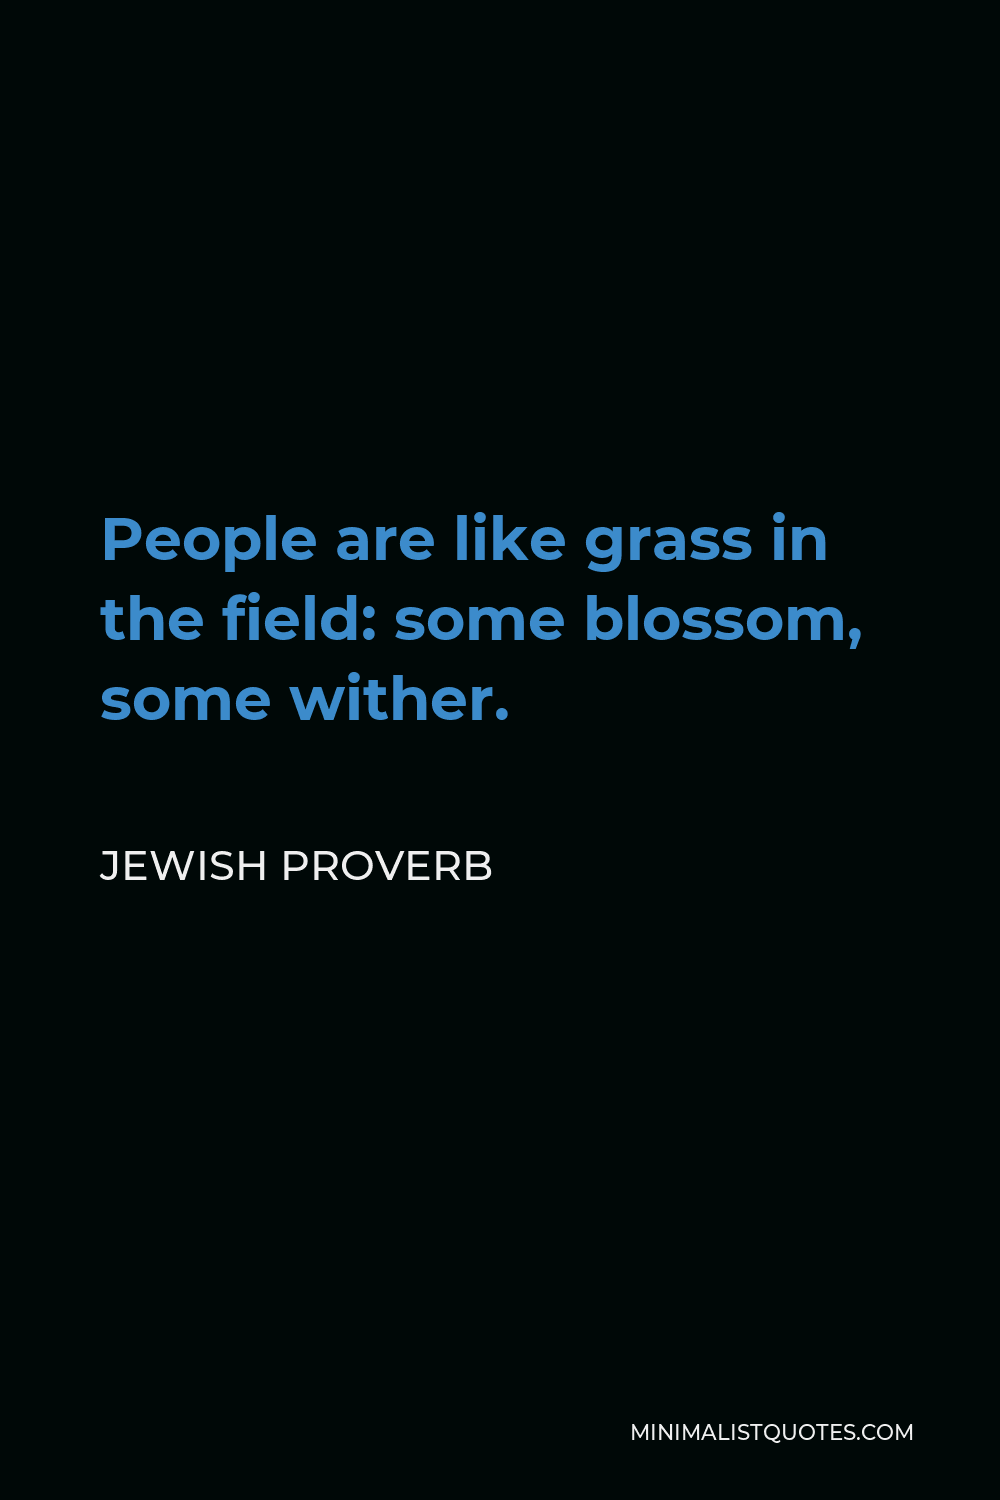 Jewish Proverb Quote - People are like grass in the field: some blossom, some wither.